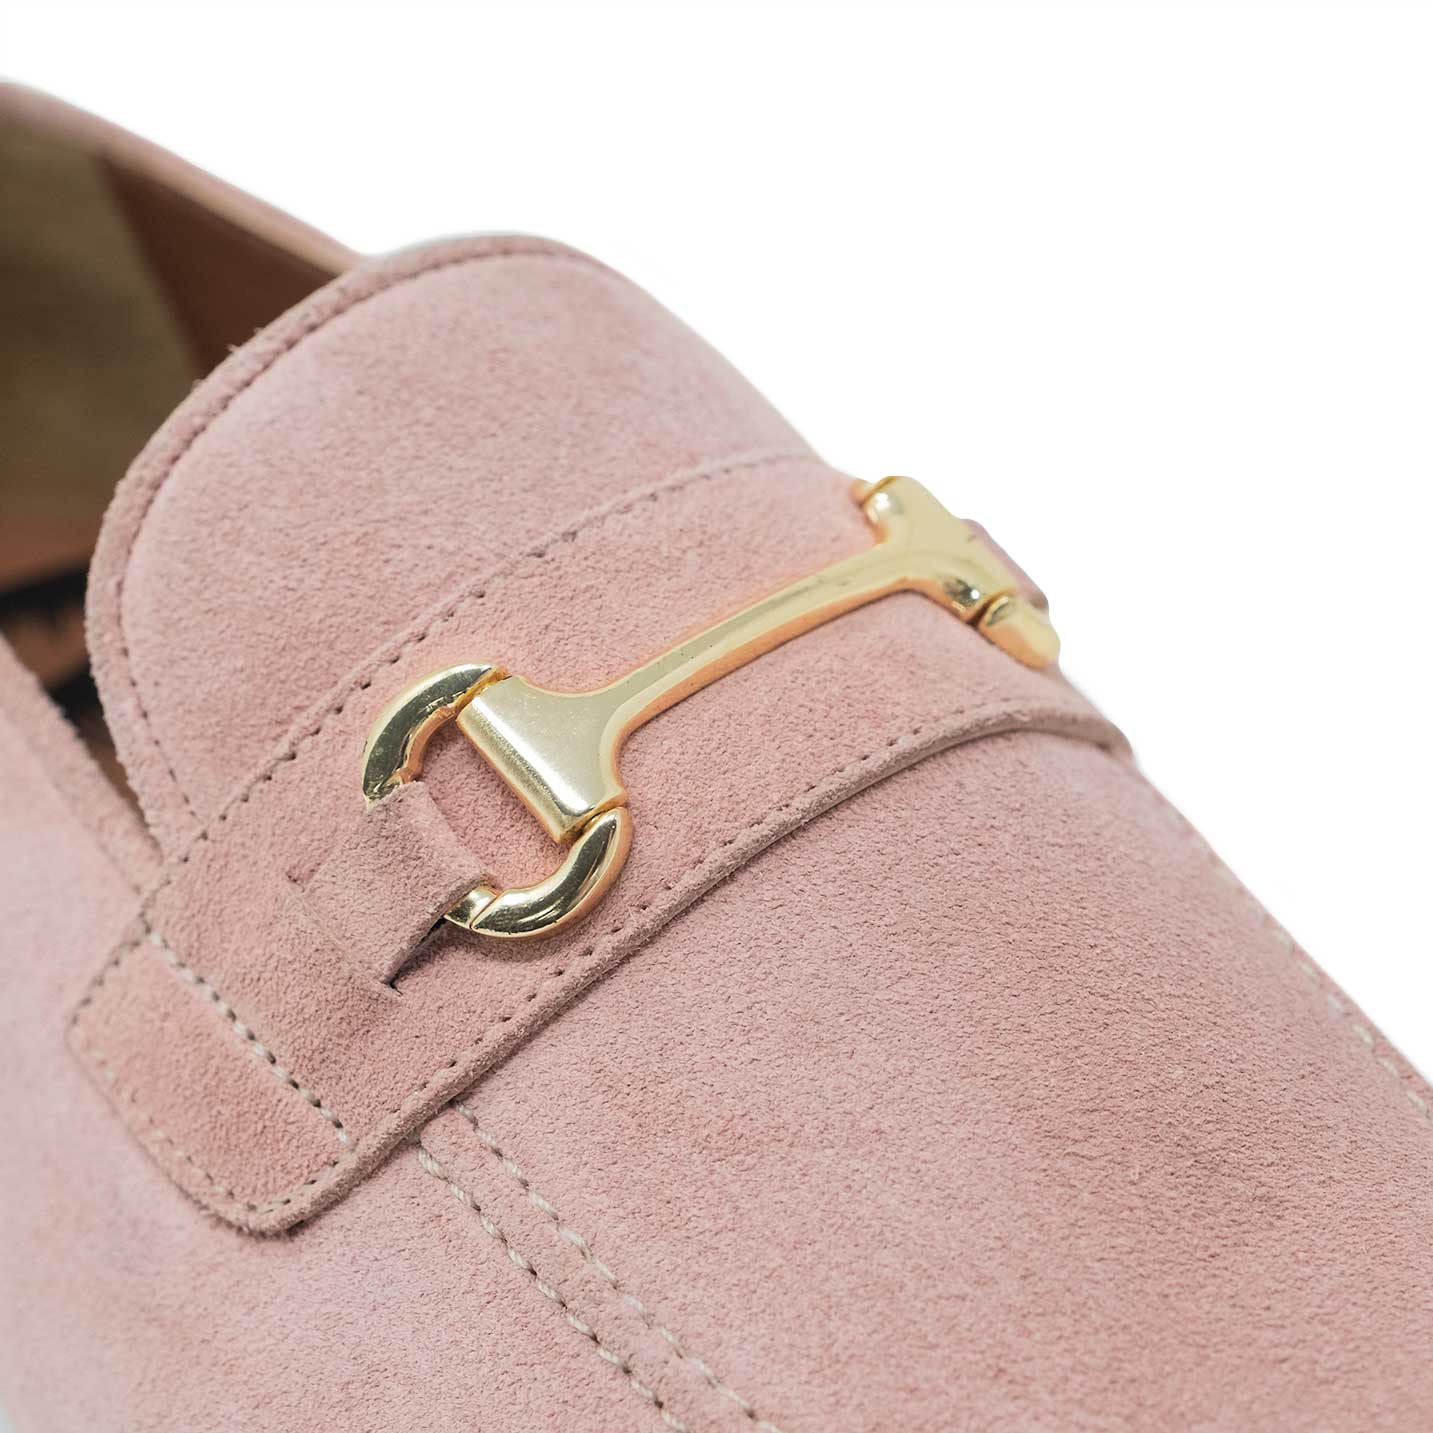 Gold Snaffle Bit on the Pink Terry Trim Loafer